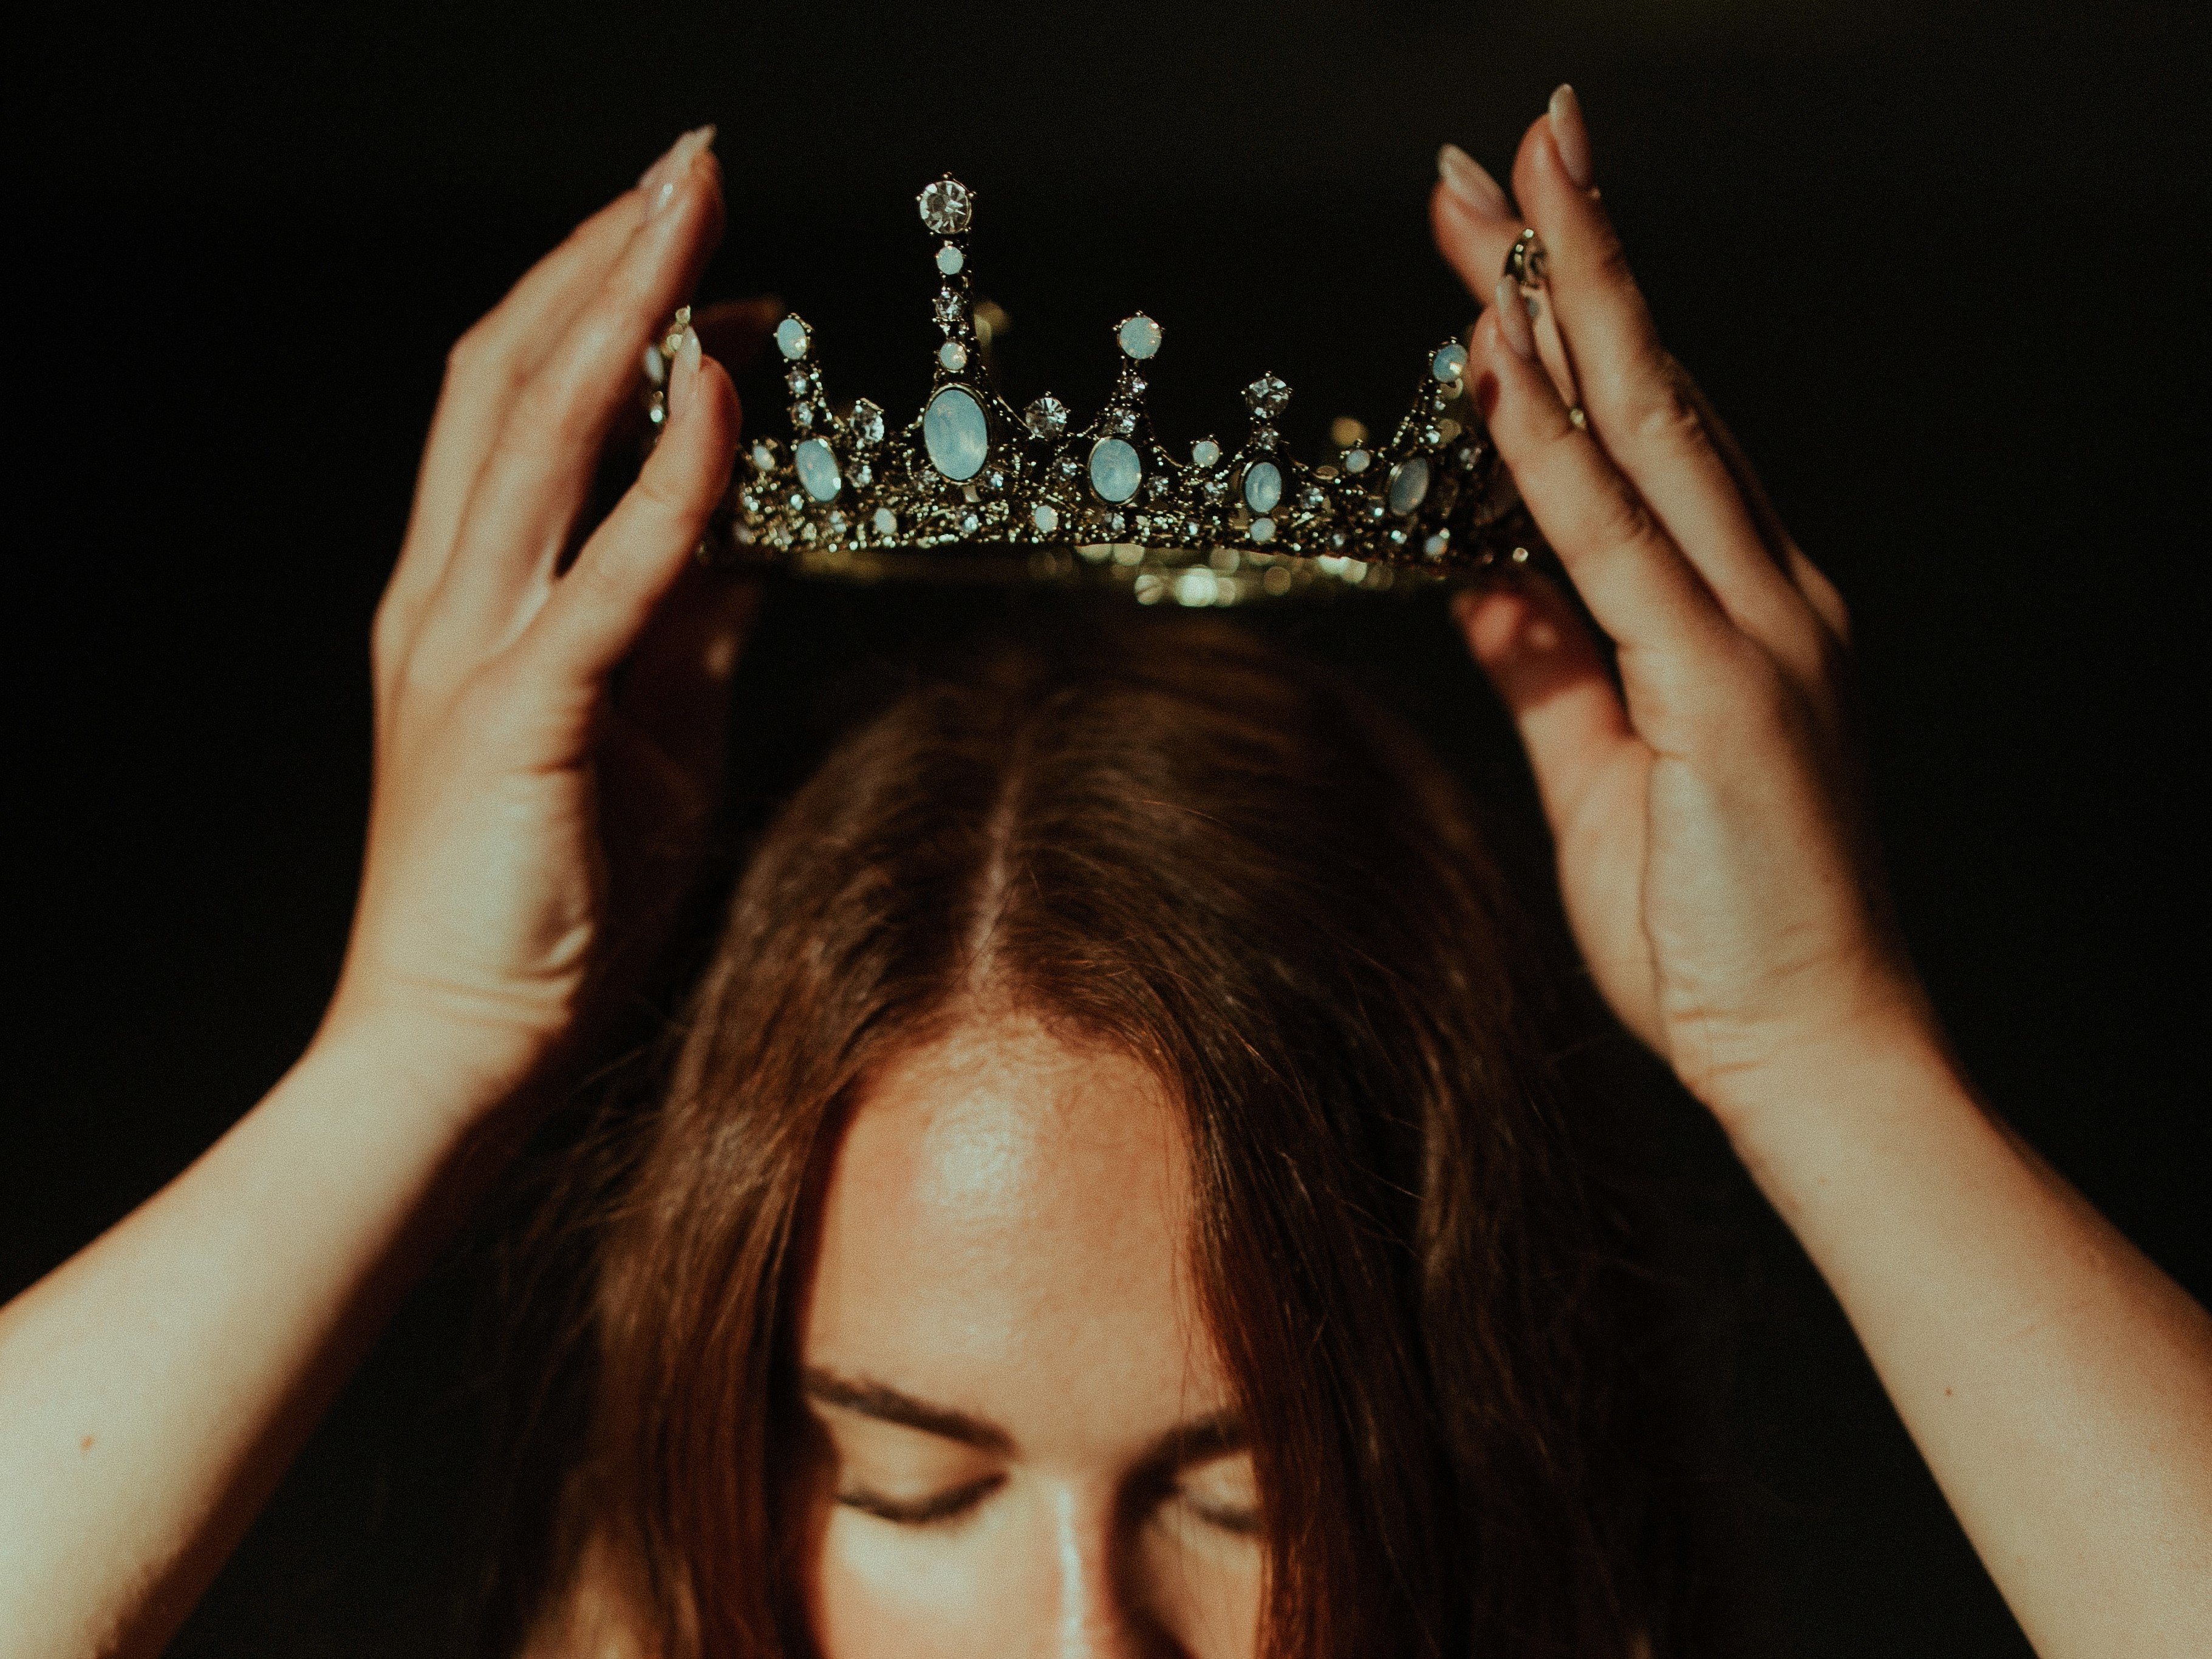 Woman putting a crown on